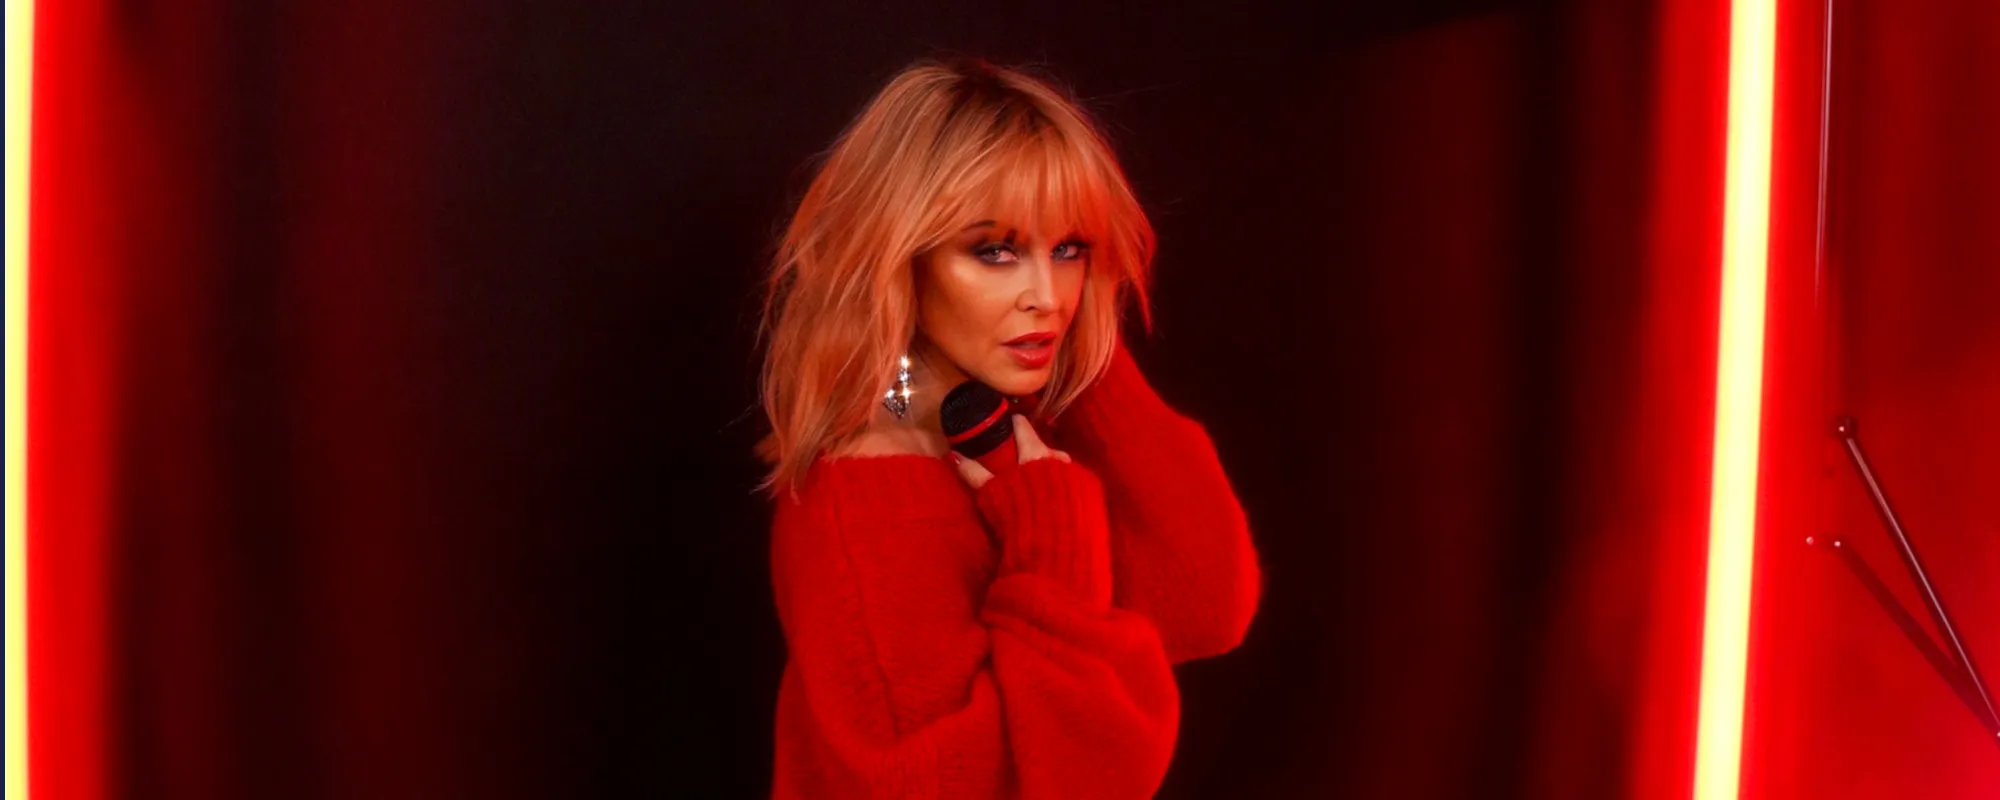 Kylie Minogue Teases New Single Ahead of ‘Tension’ Release